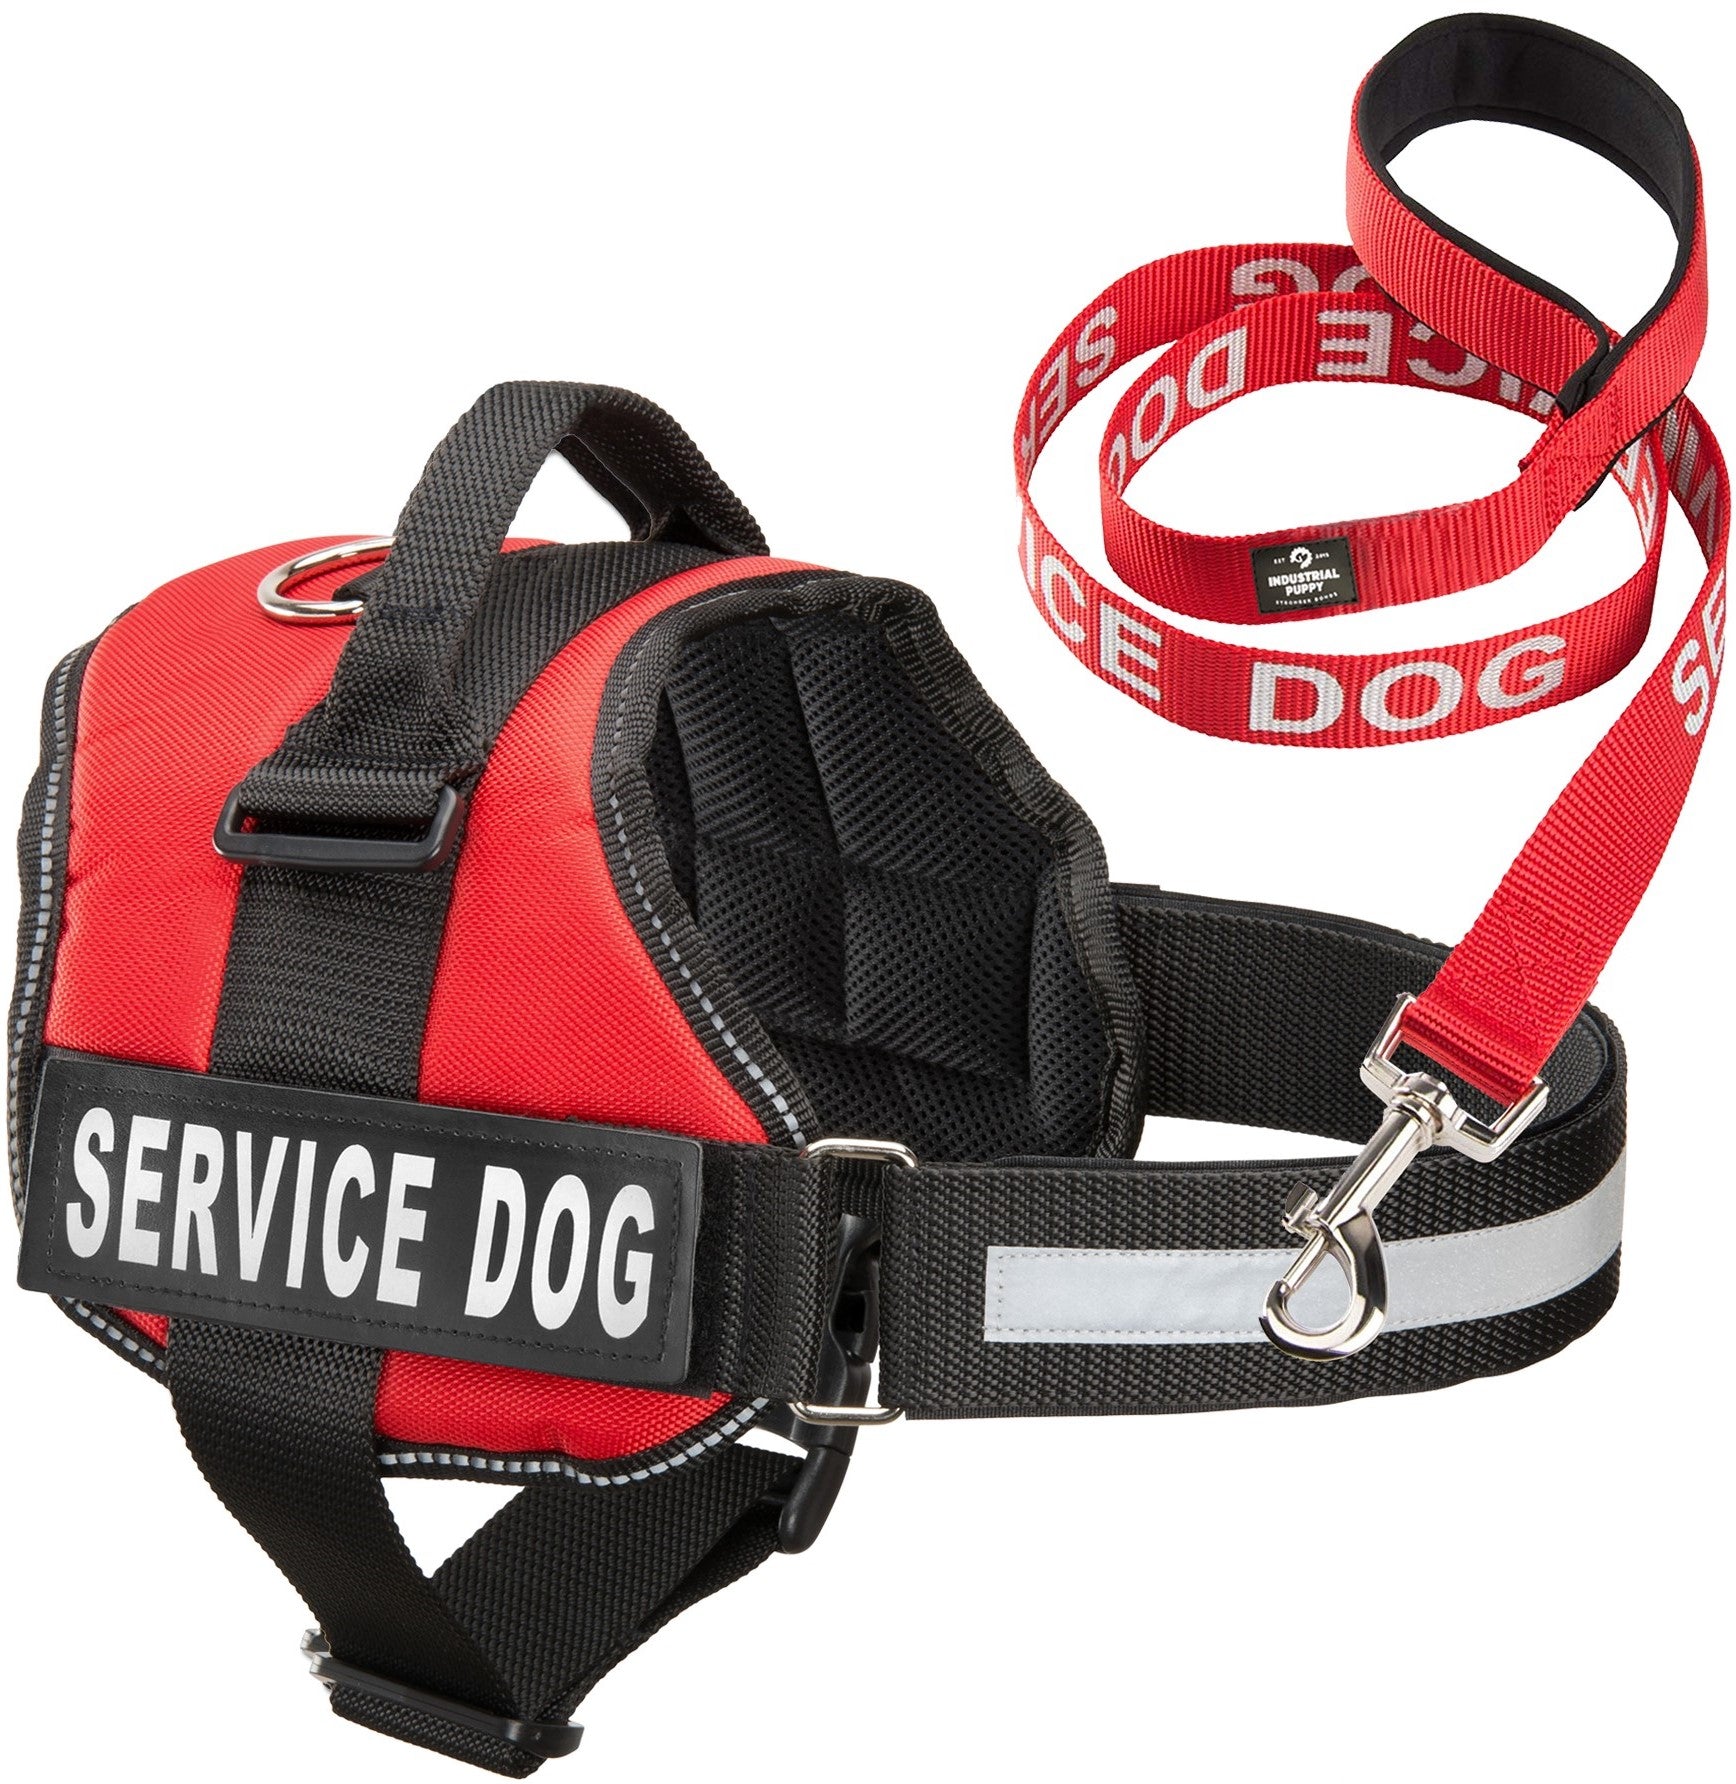 Service Dog Vest Harness w/ 2 Reflective SERVICE DOG Patches PLUS a –  Industrial Puppy